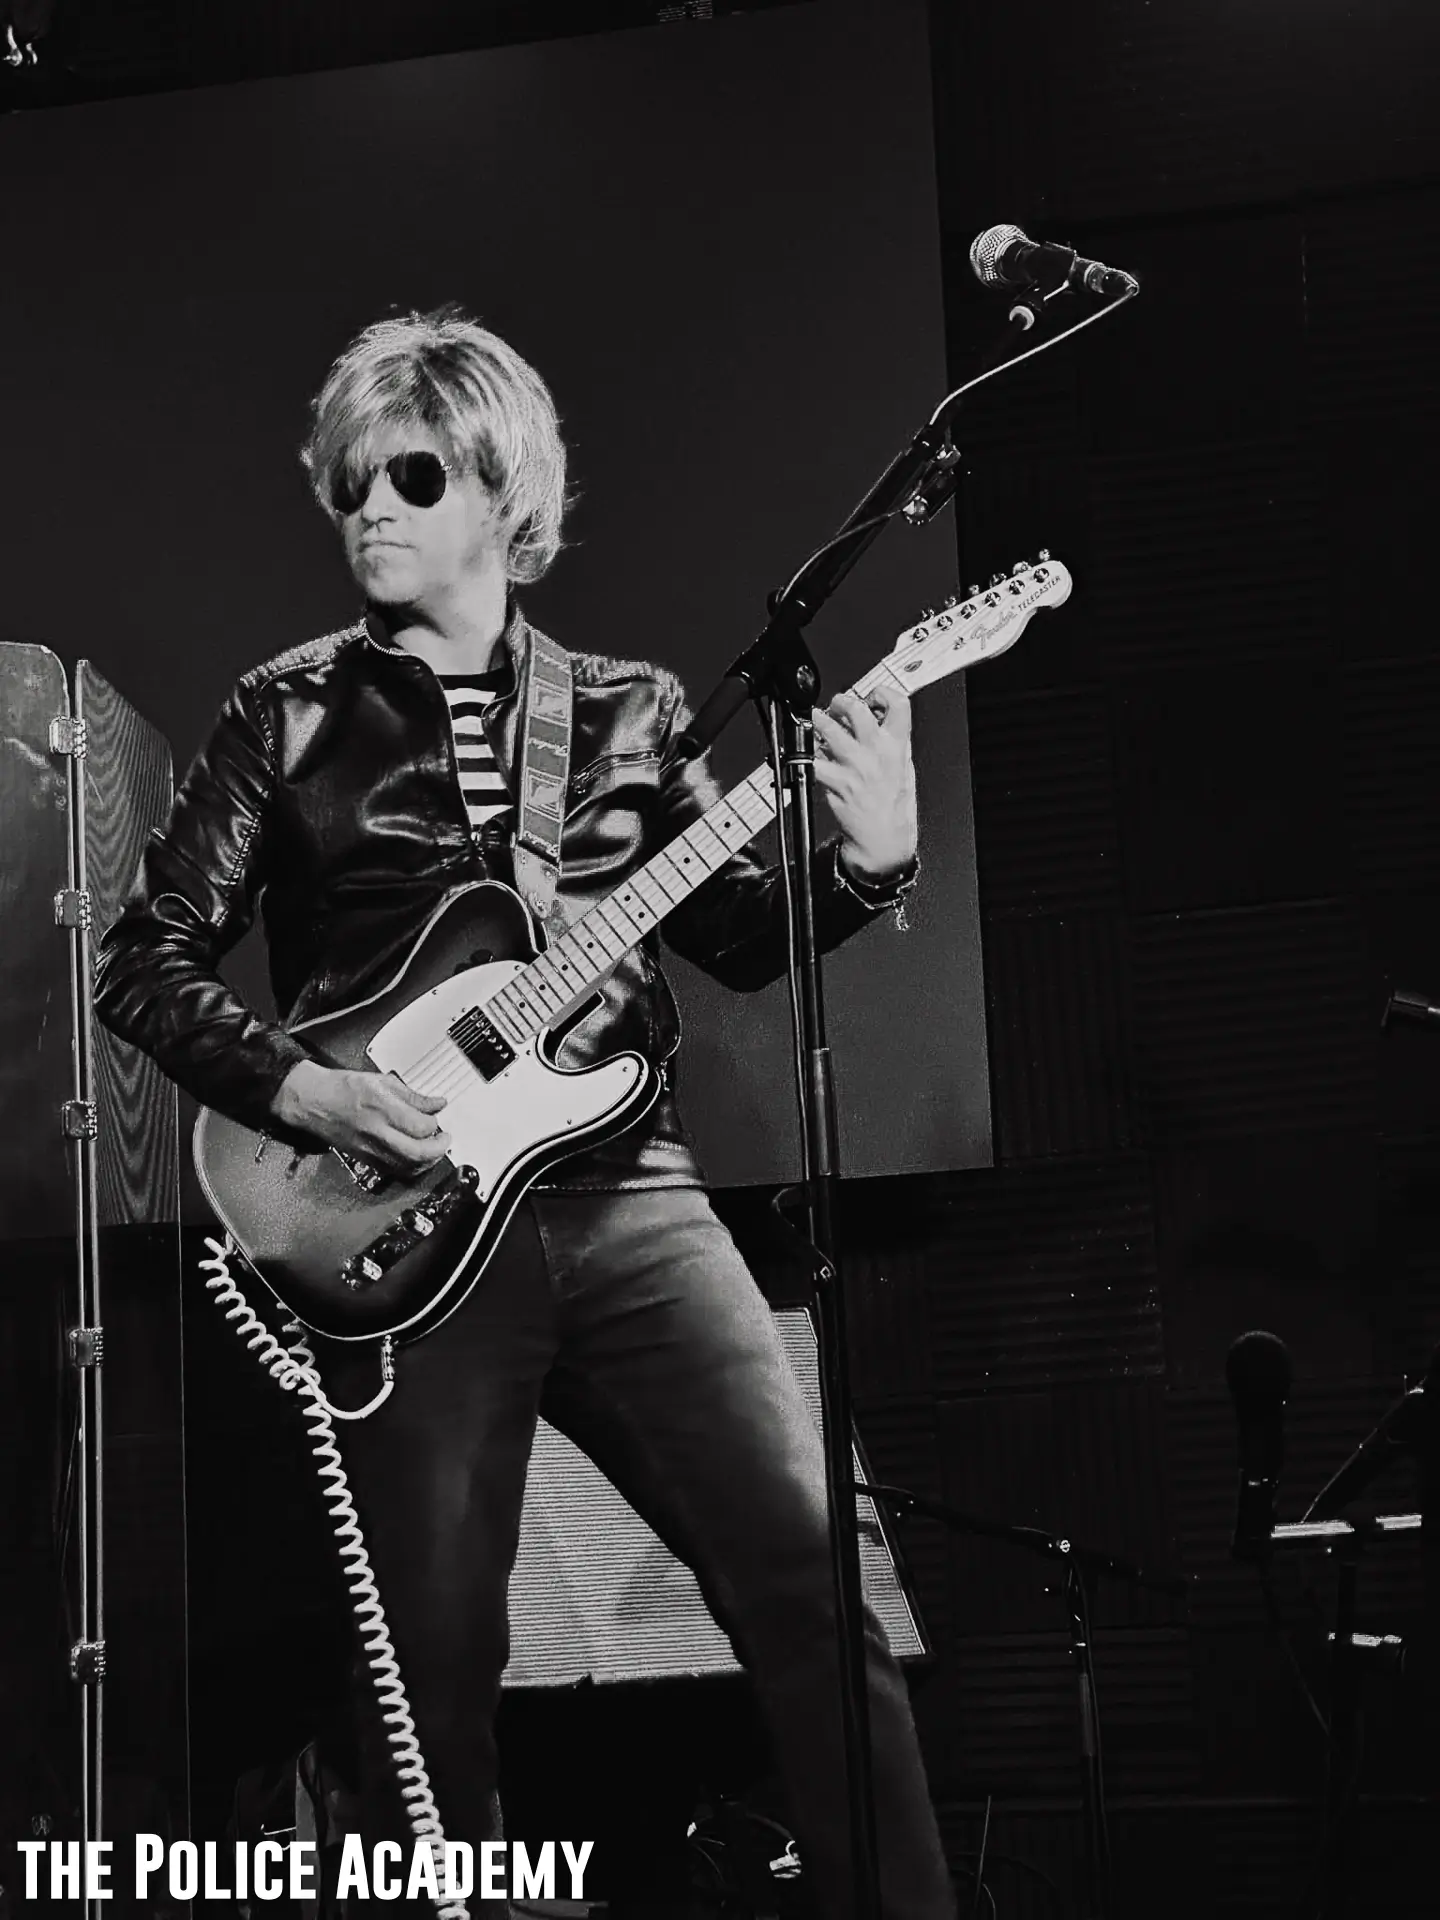 The Police Academy - the Greatest Tribute to The Police | Christian Hernandez as Andy Summers